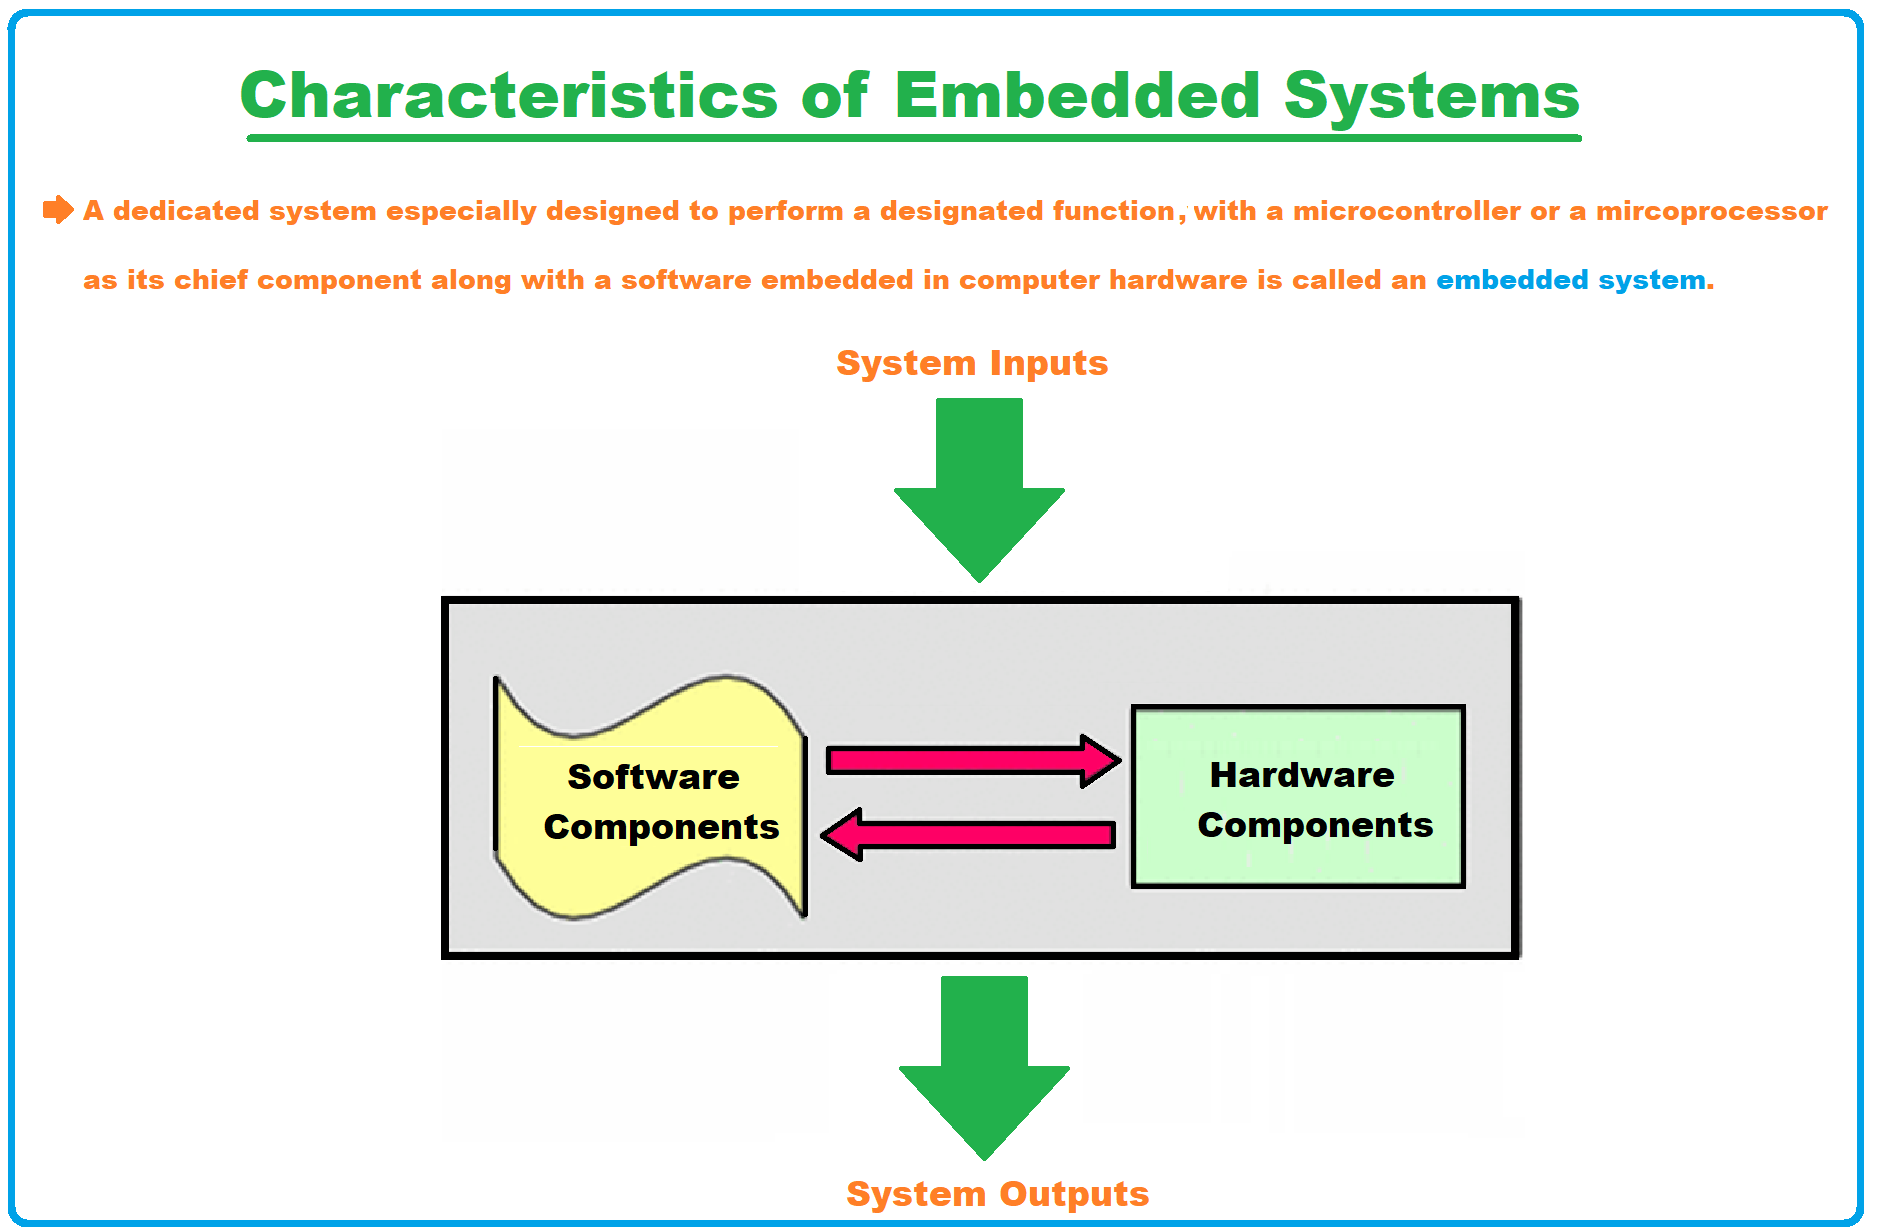 Characteristics-of-Embedded-Systems.png